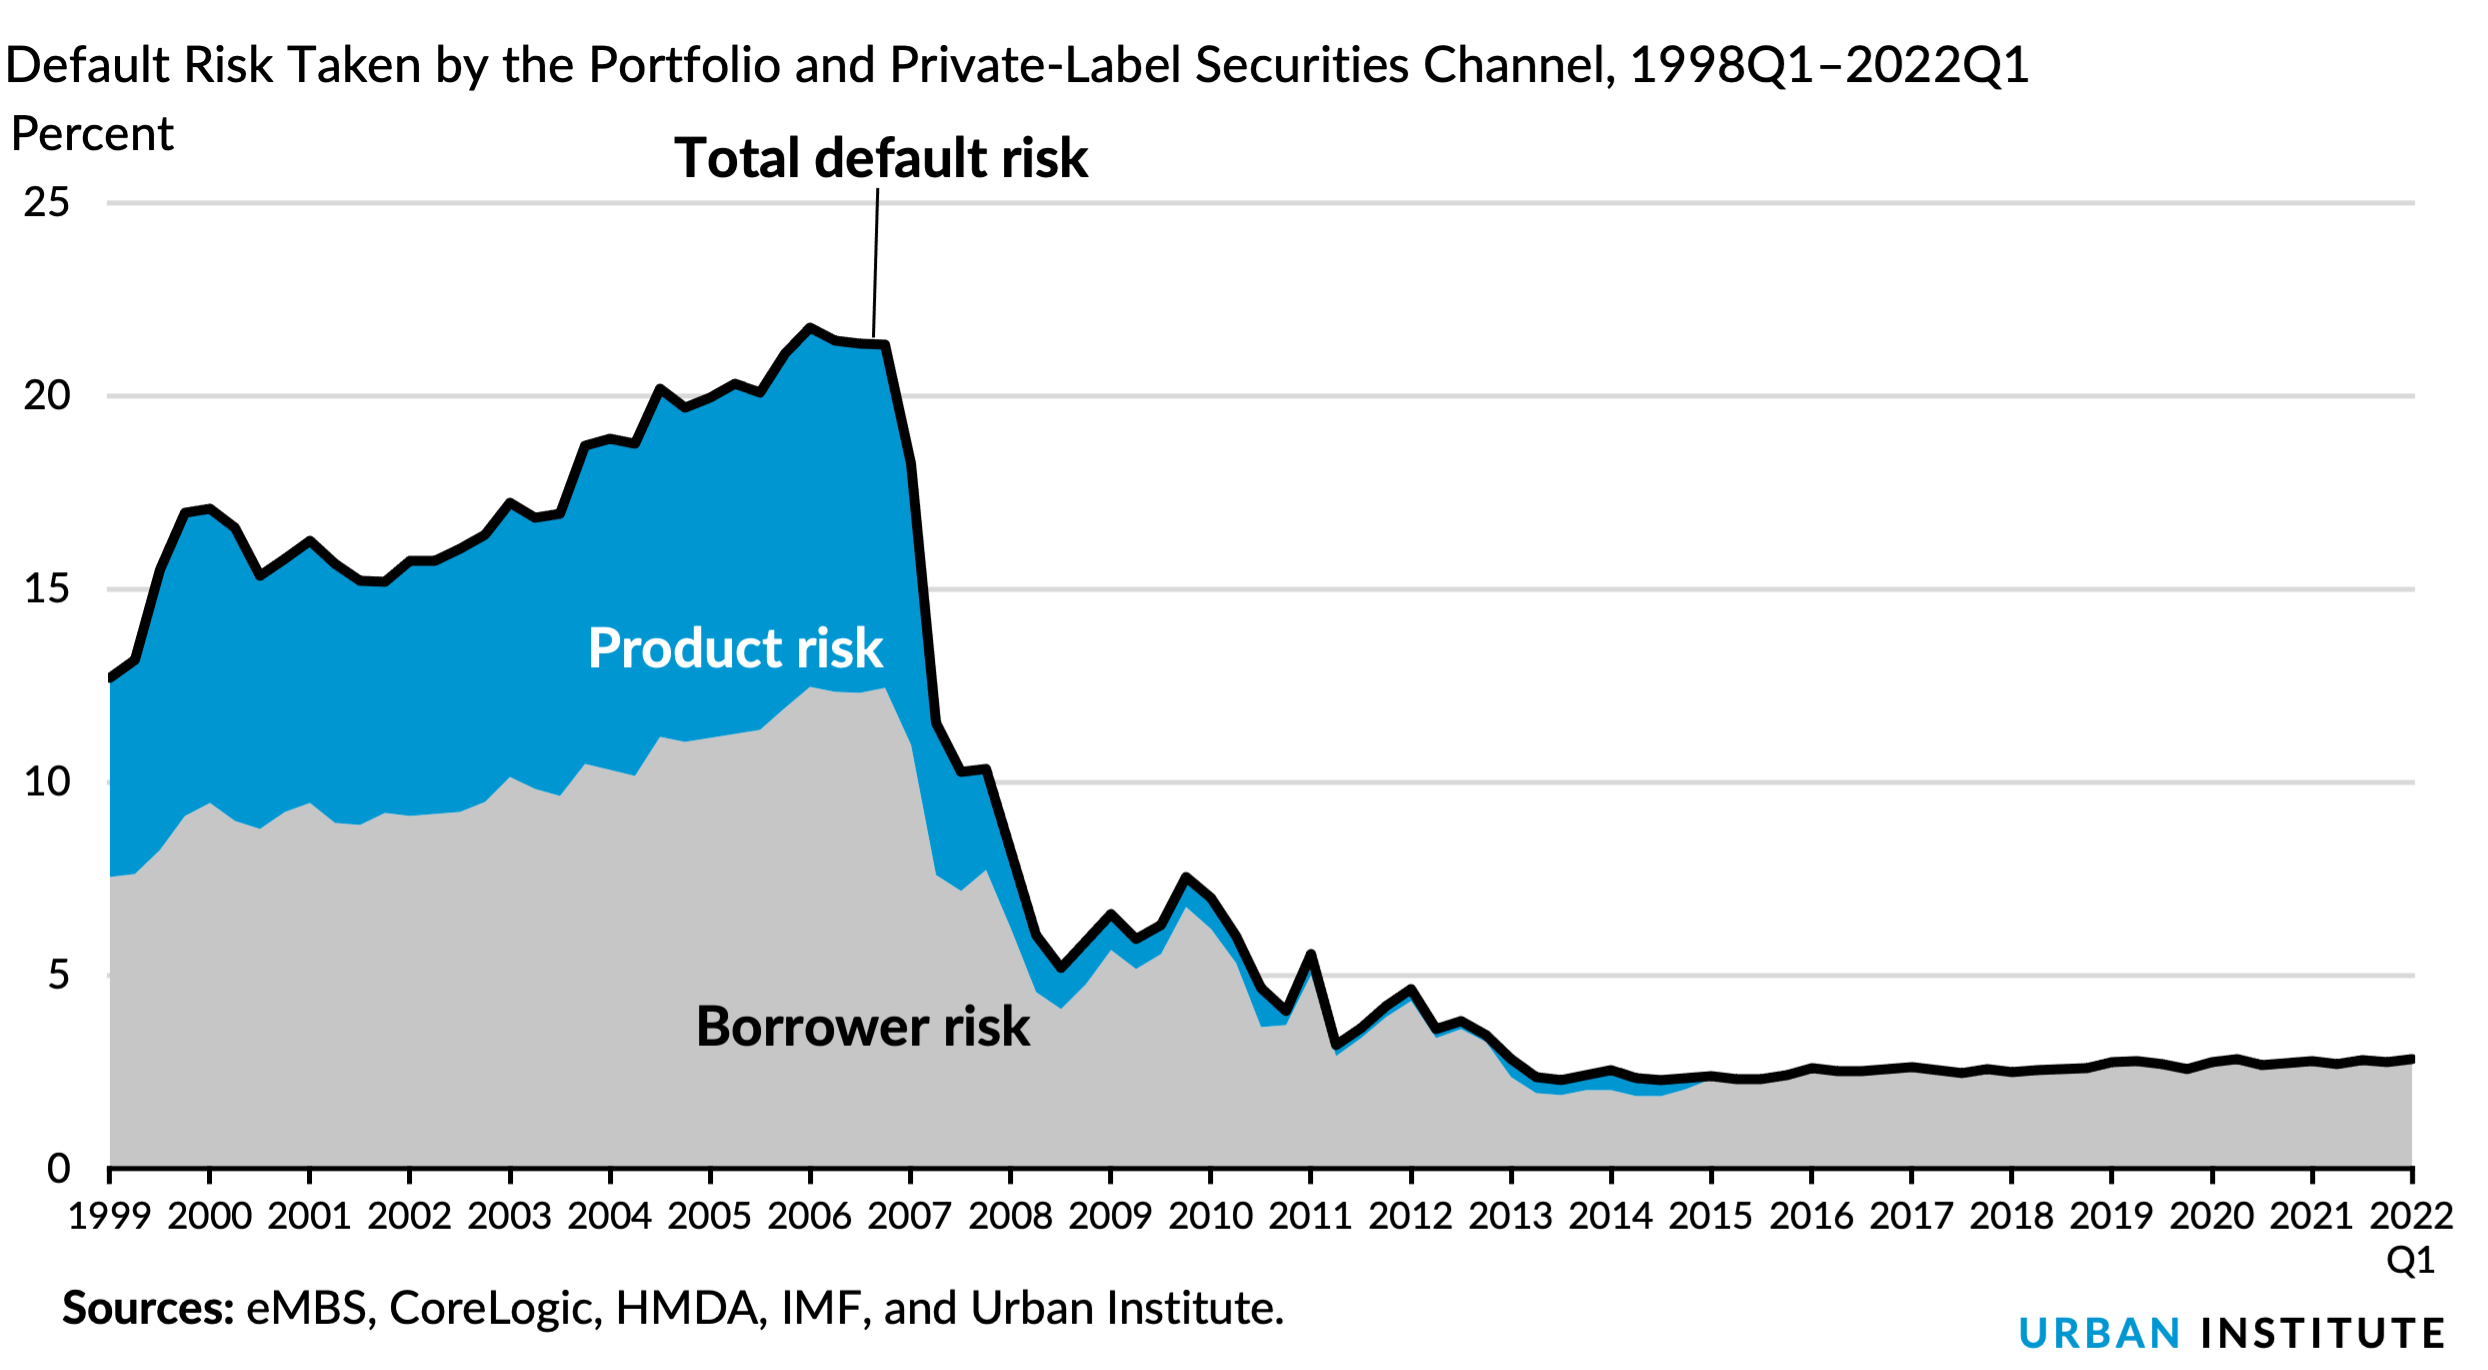 Default Risk Taken by the Portfolio and Private-Label Securities Channel, 1998Q1-2022Q1